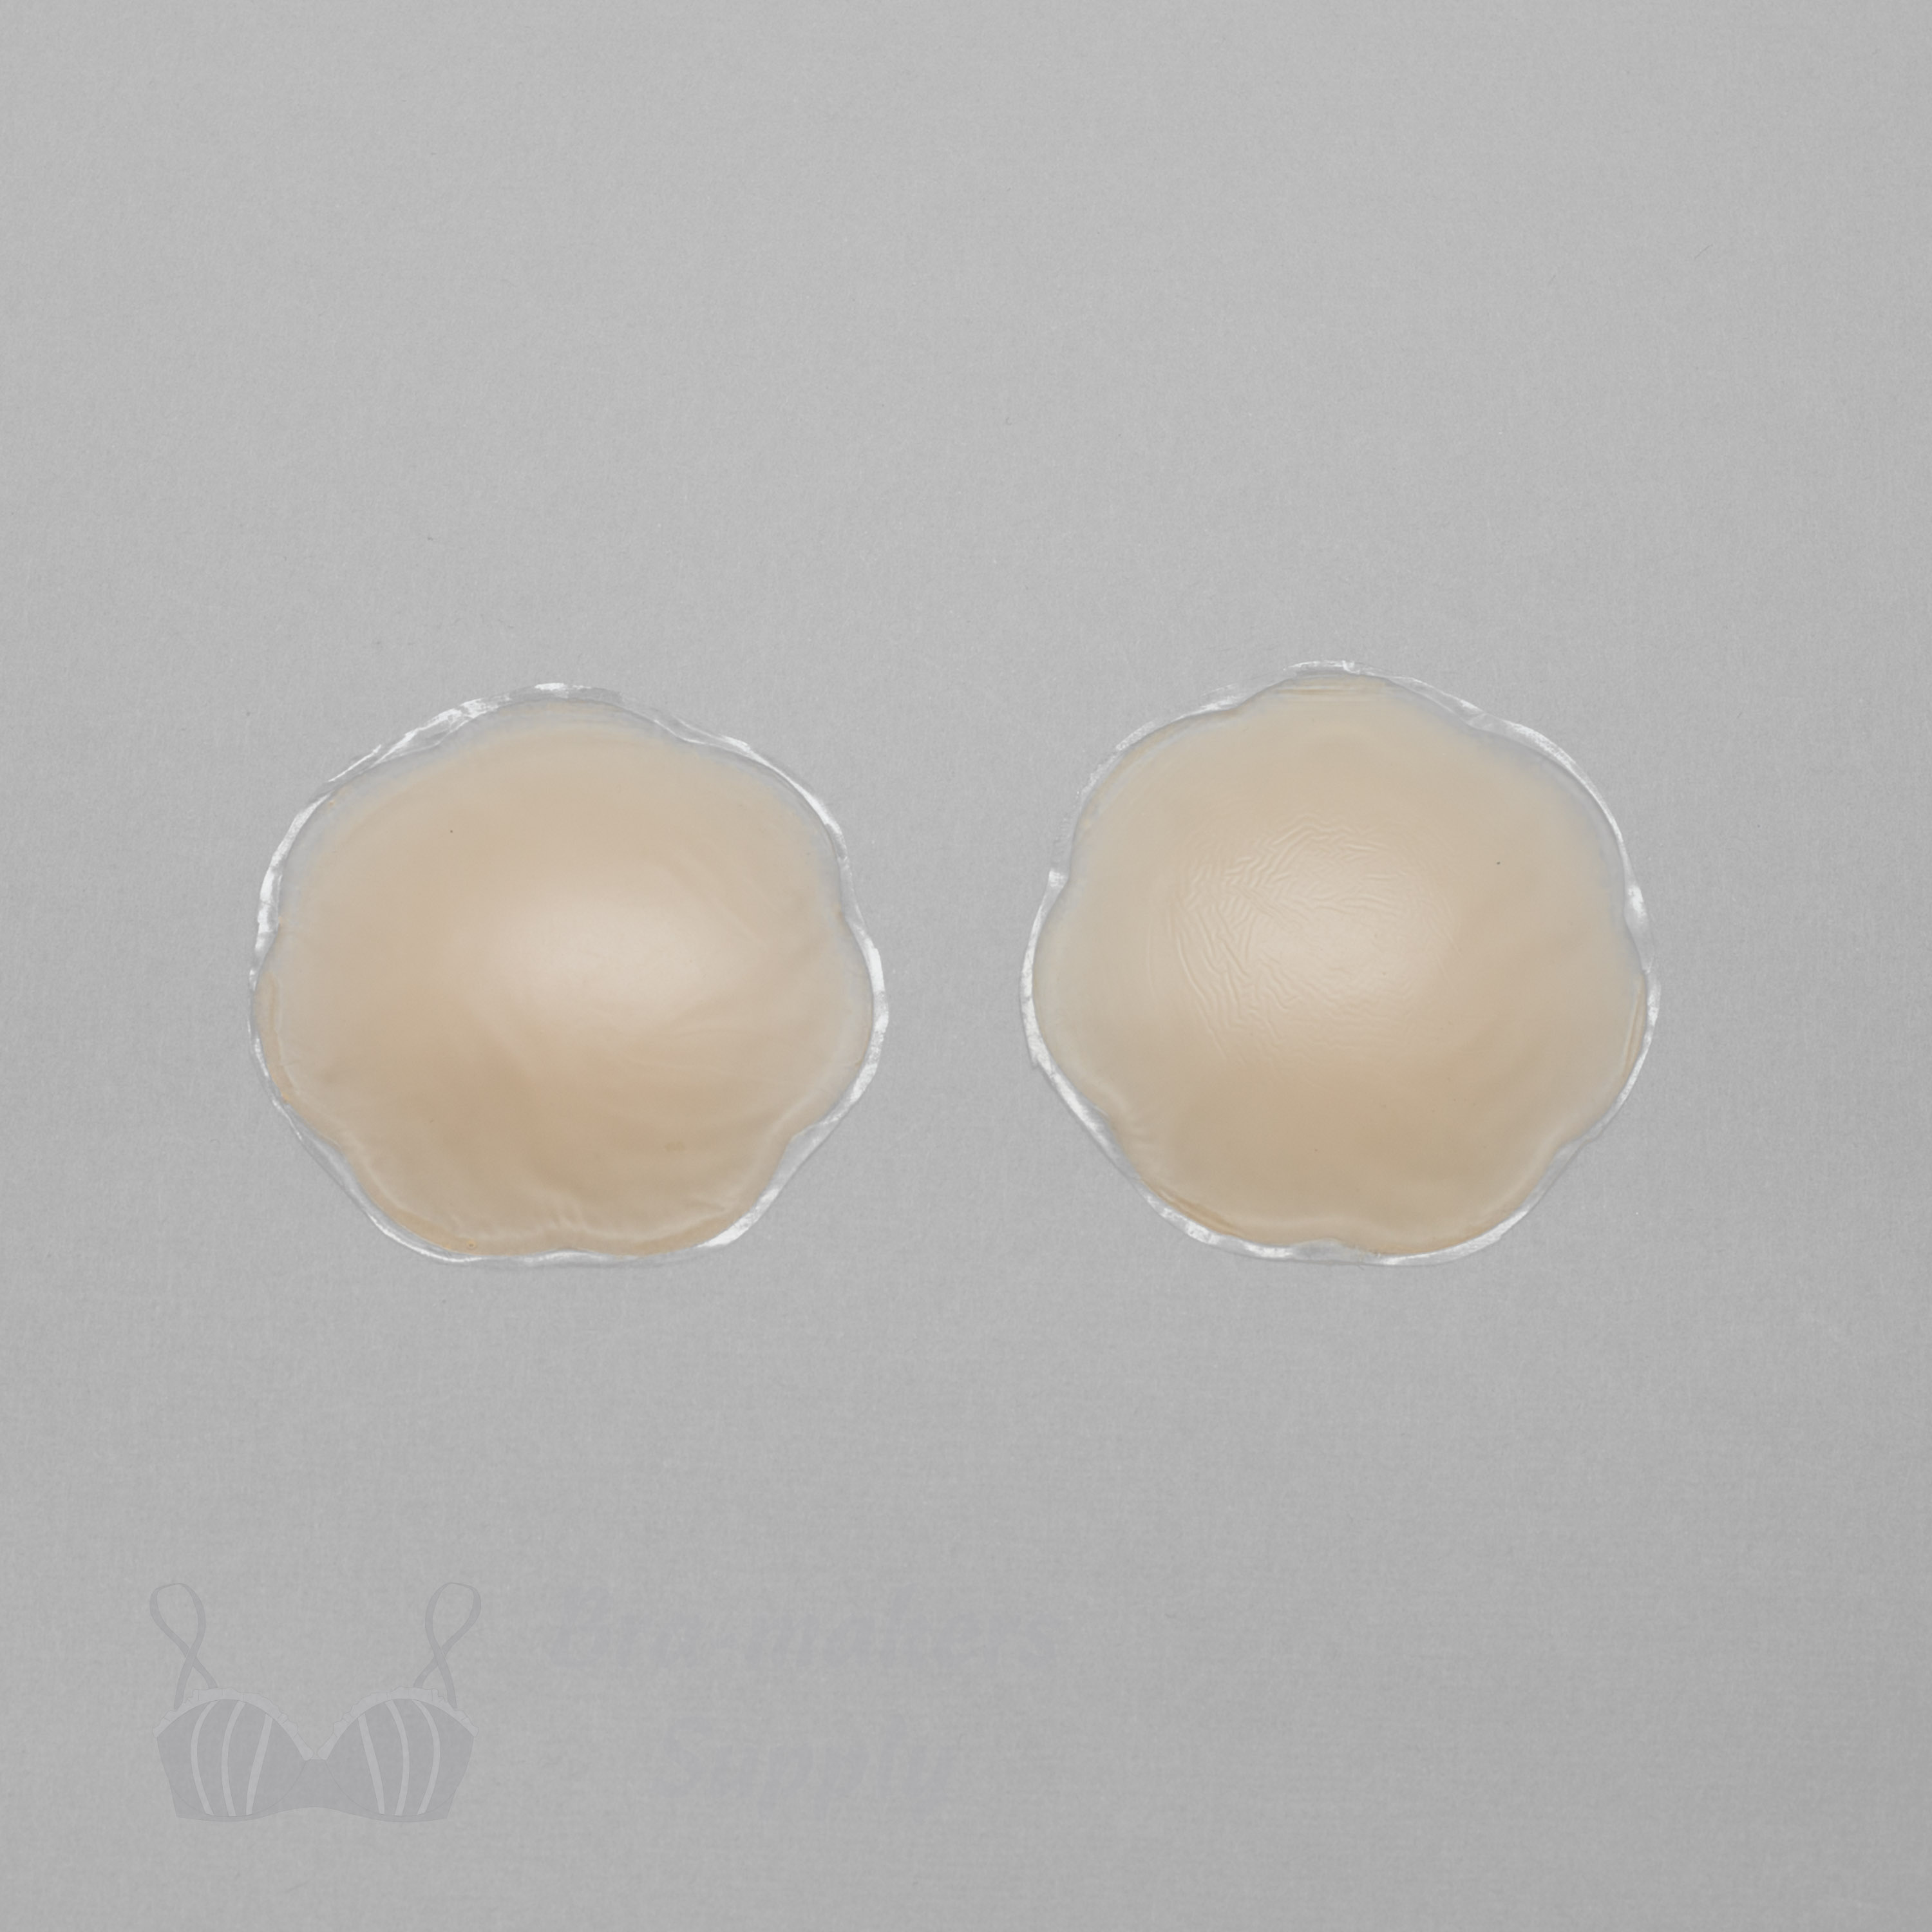 https://www.braandcorsetsupplies.com/wp-content/uploads/2016/09/silicone-nipple-covers-AN-20-from-Bra-Makers-Supply-Hamilton.jpg